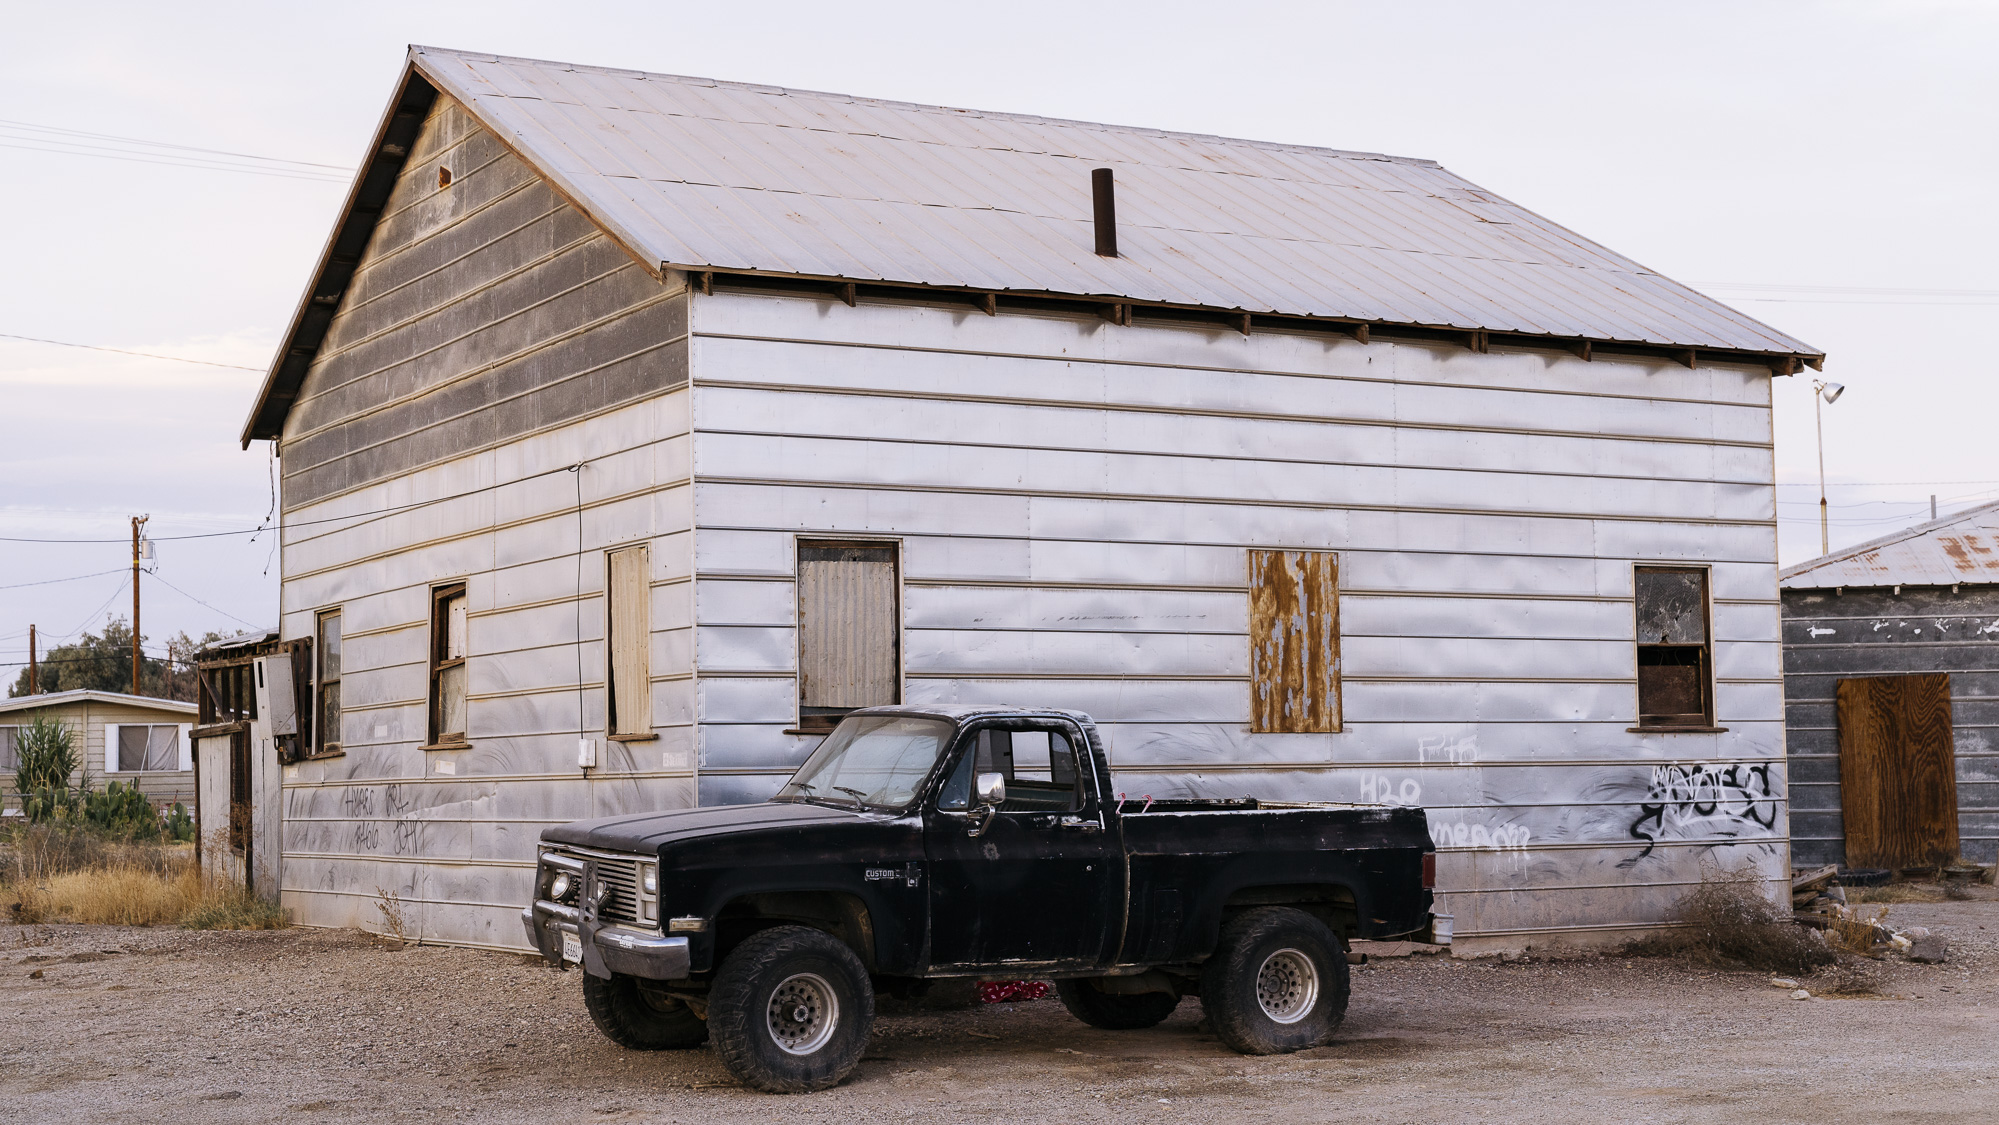  IMAGE CAPTION:  A truck parked outside an abandoned home in Niland, California. 40 miles from the Calexico Port of Entry. &nbsp; 